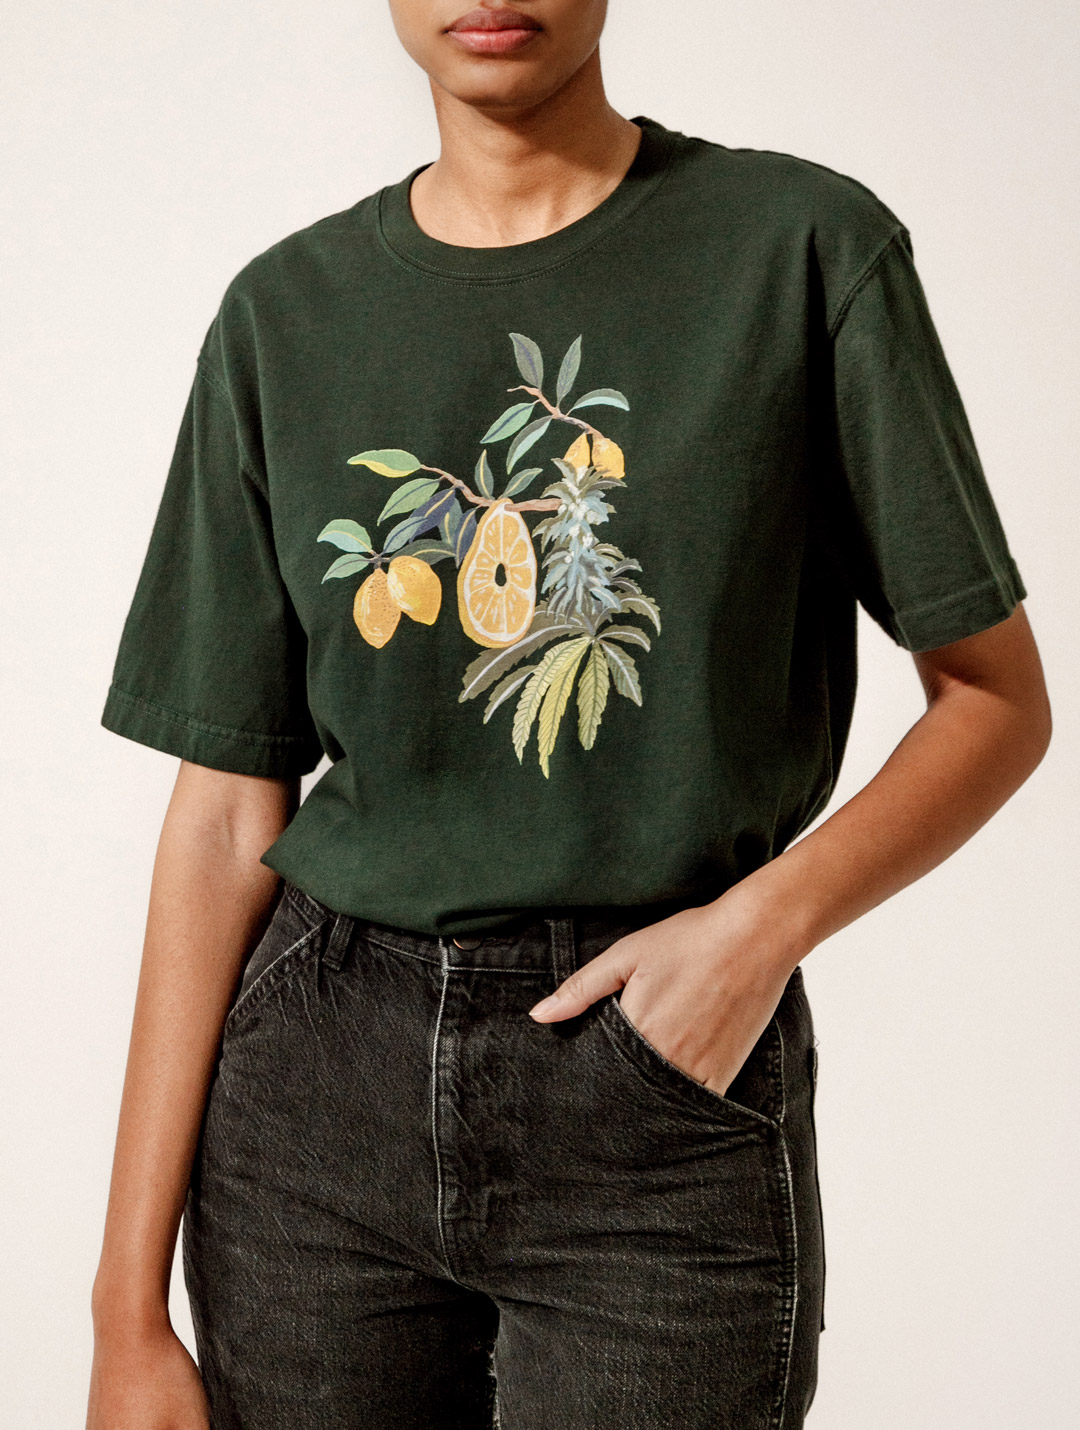 model wearing green t-shirt with lemon and cannabis illustration